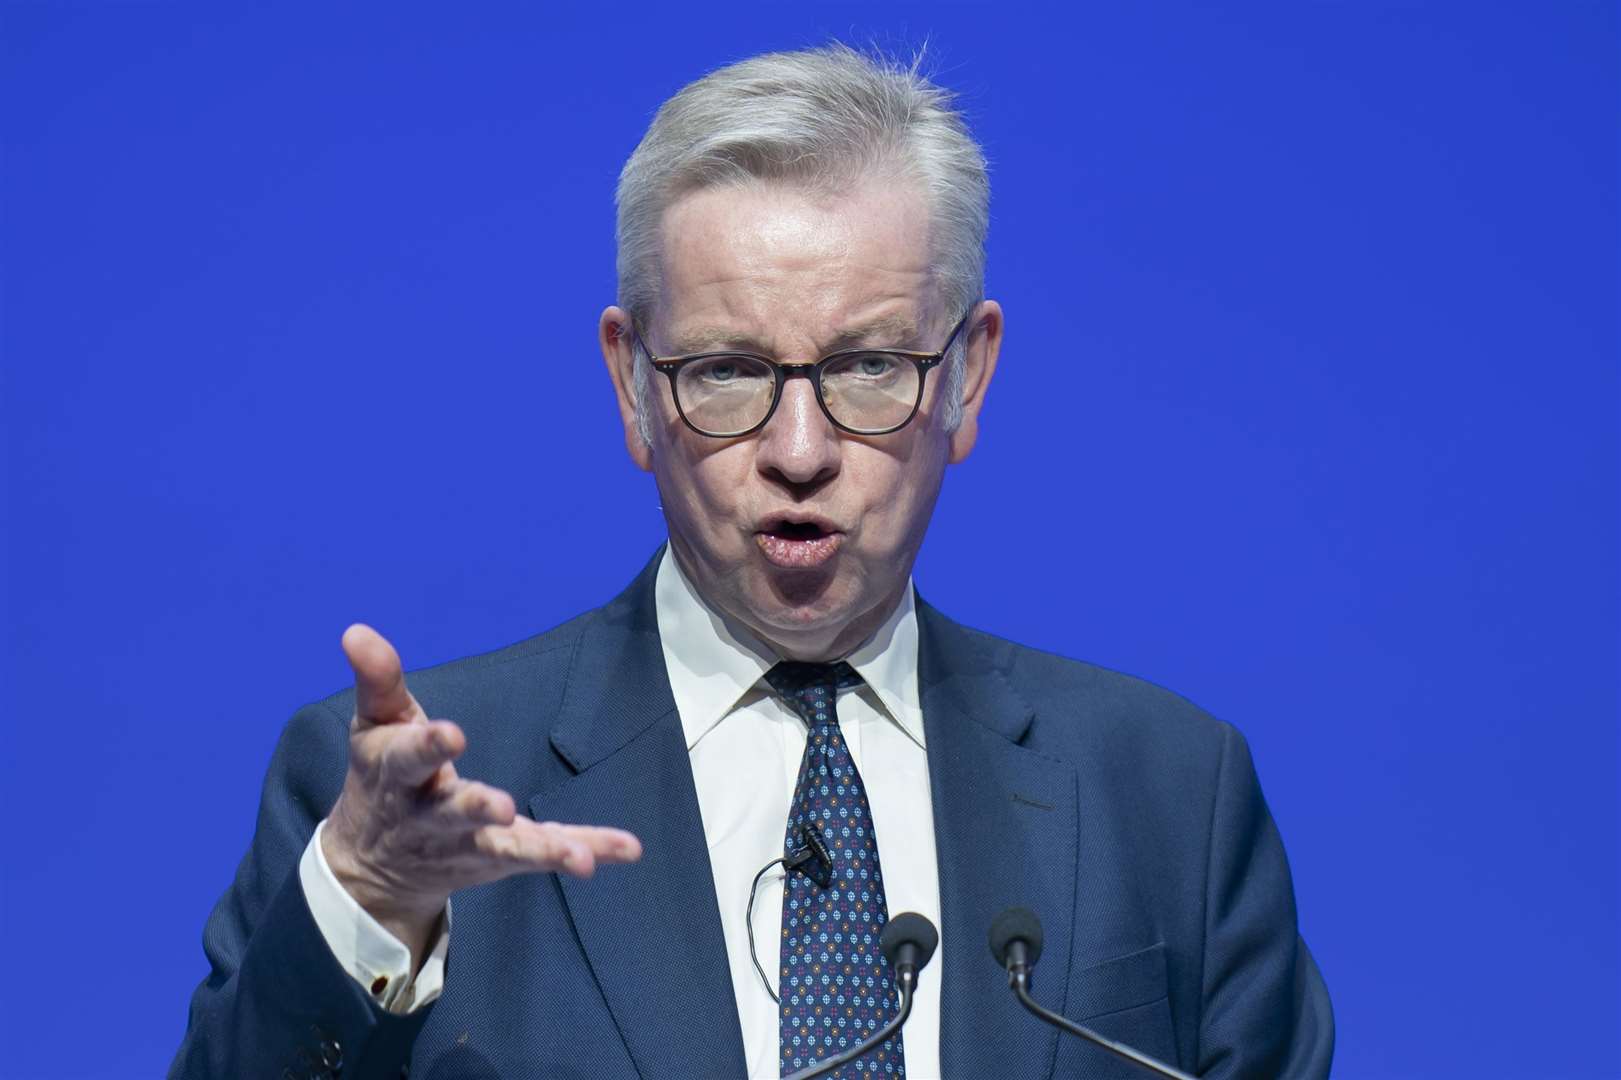 Michael Gove said abolishing the 45p tax rate and lifting caps on bankers’ bonuses at a time when people are facing hardship displays ‘the wrong values’ (Danny Lawson/PA)